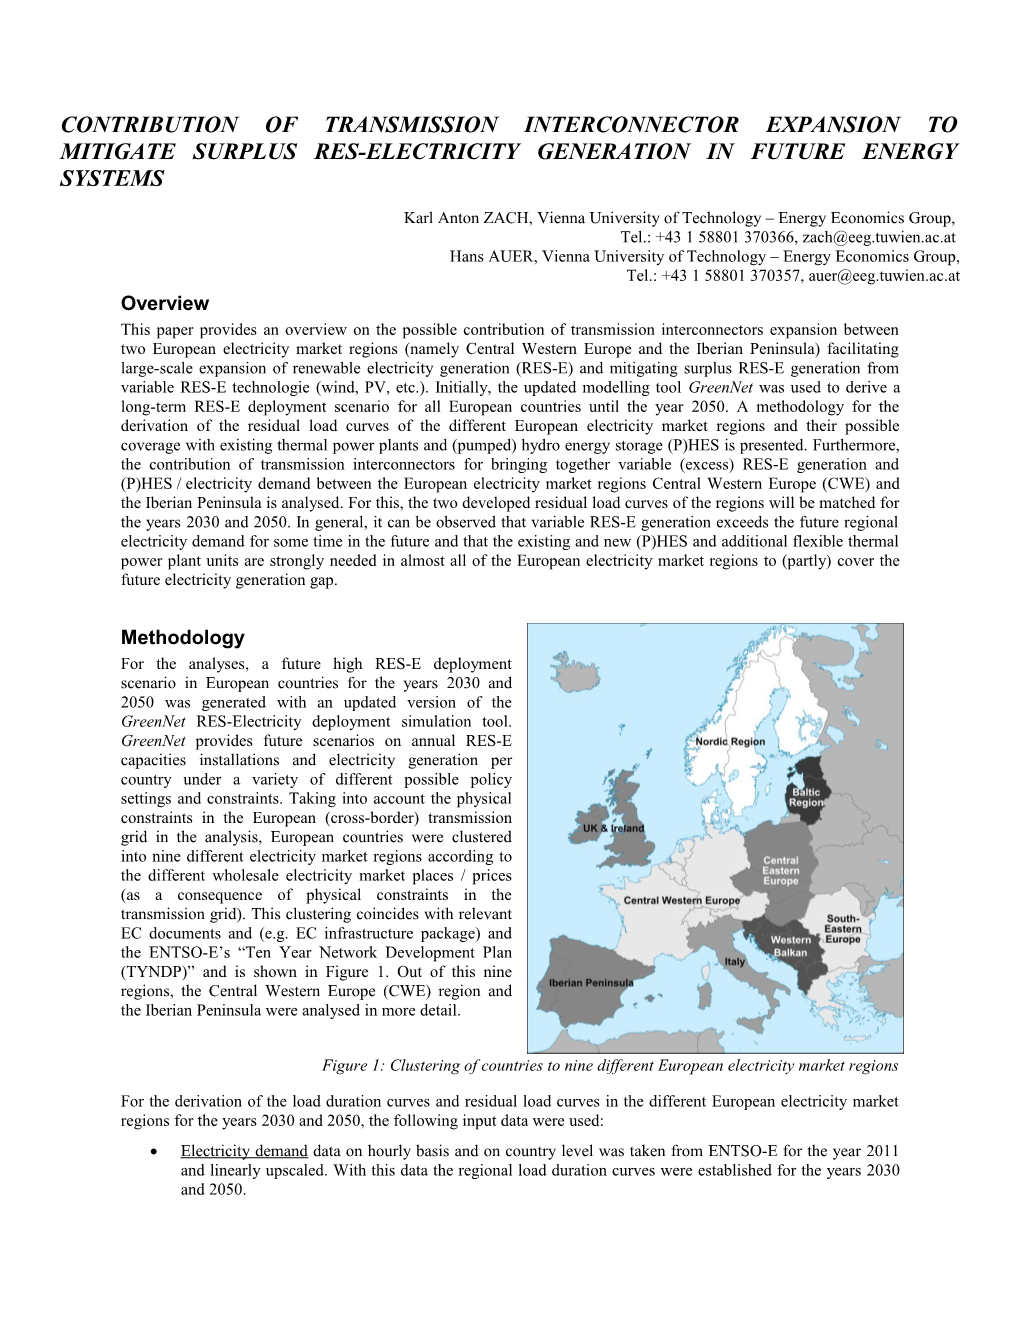 Contribution of Transmission Interconnector Expansion to Mitigate Surplus Res-Electricity